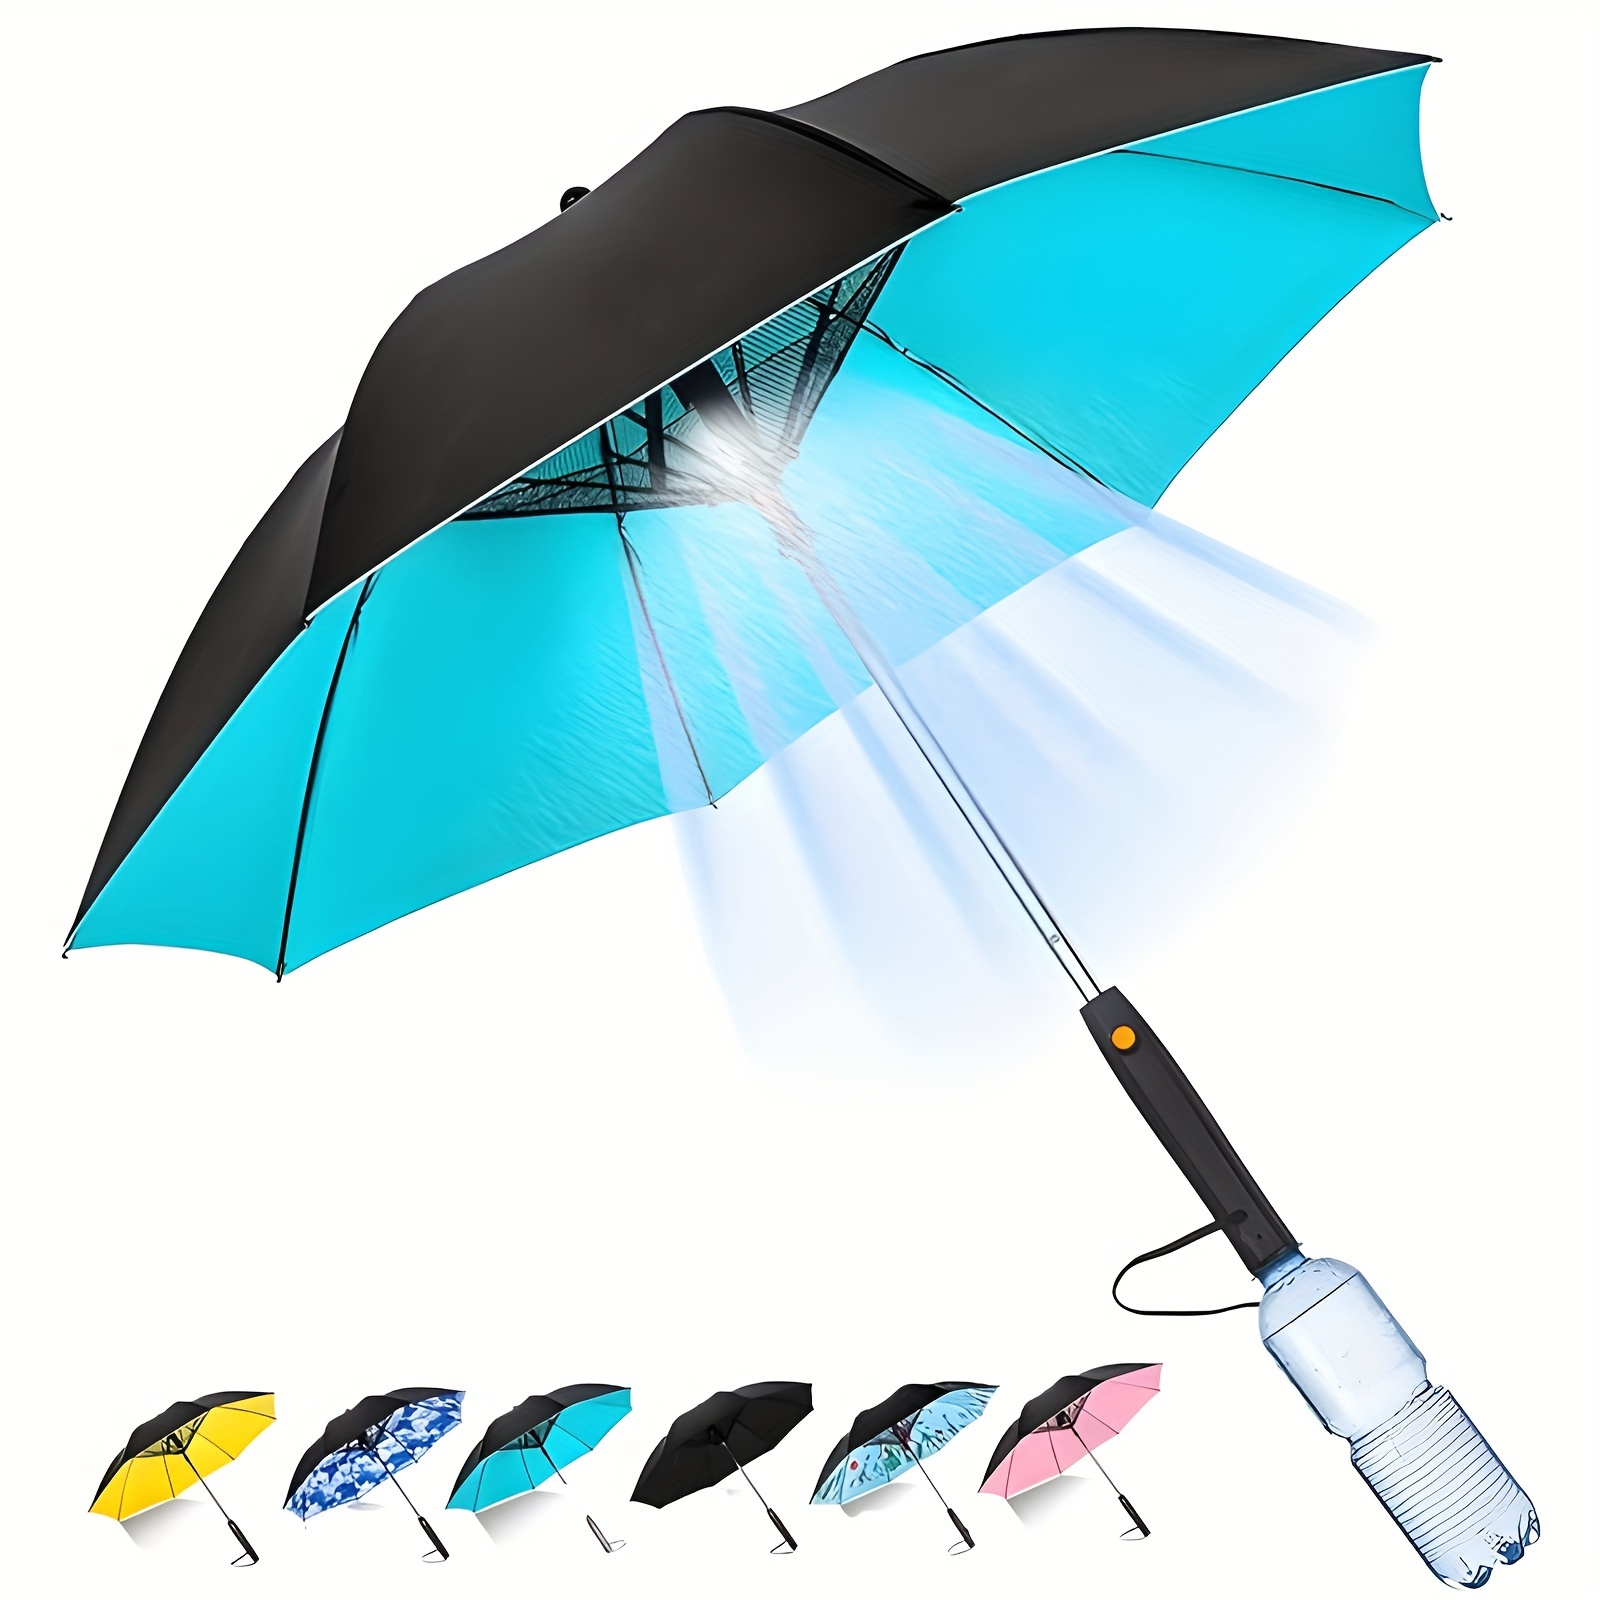 

1 Piece Of Uv Protection Umbrella With Fan, 3 In 1 Umbrella With Fan And Spray, Cooling Umbrella With Fan